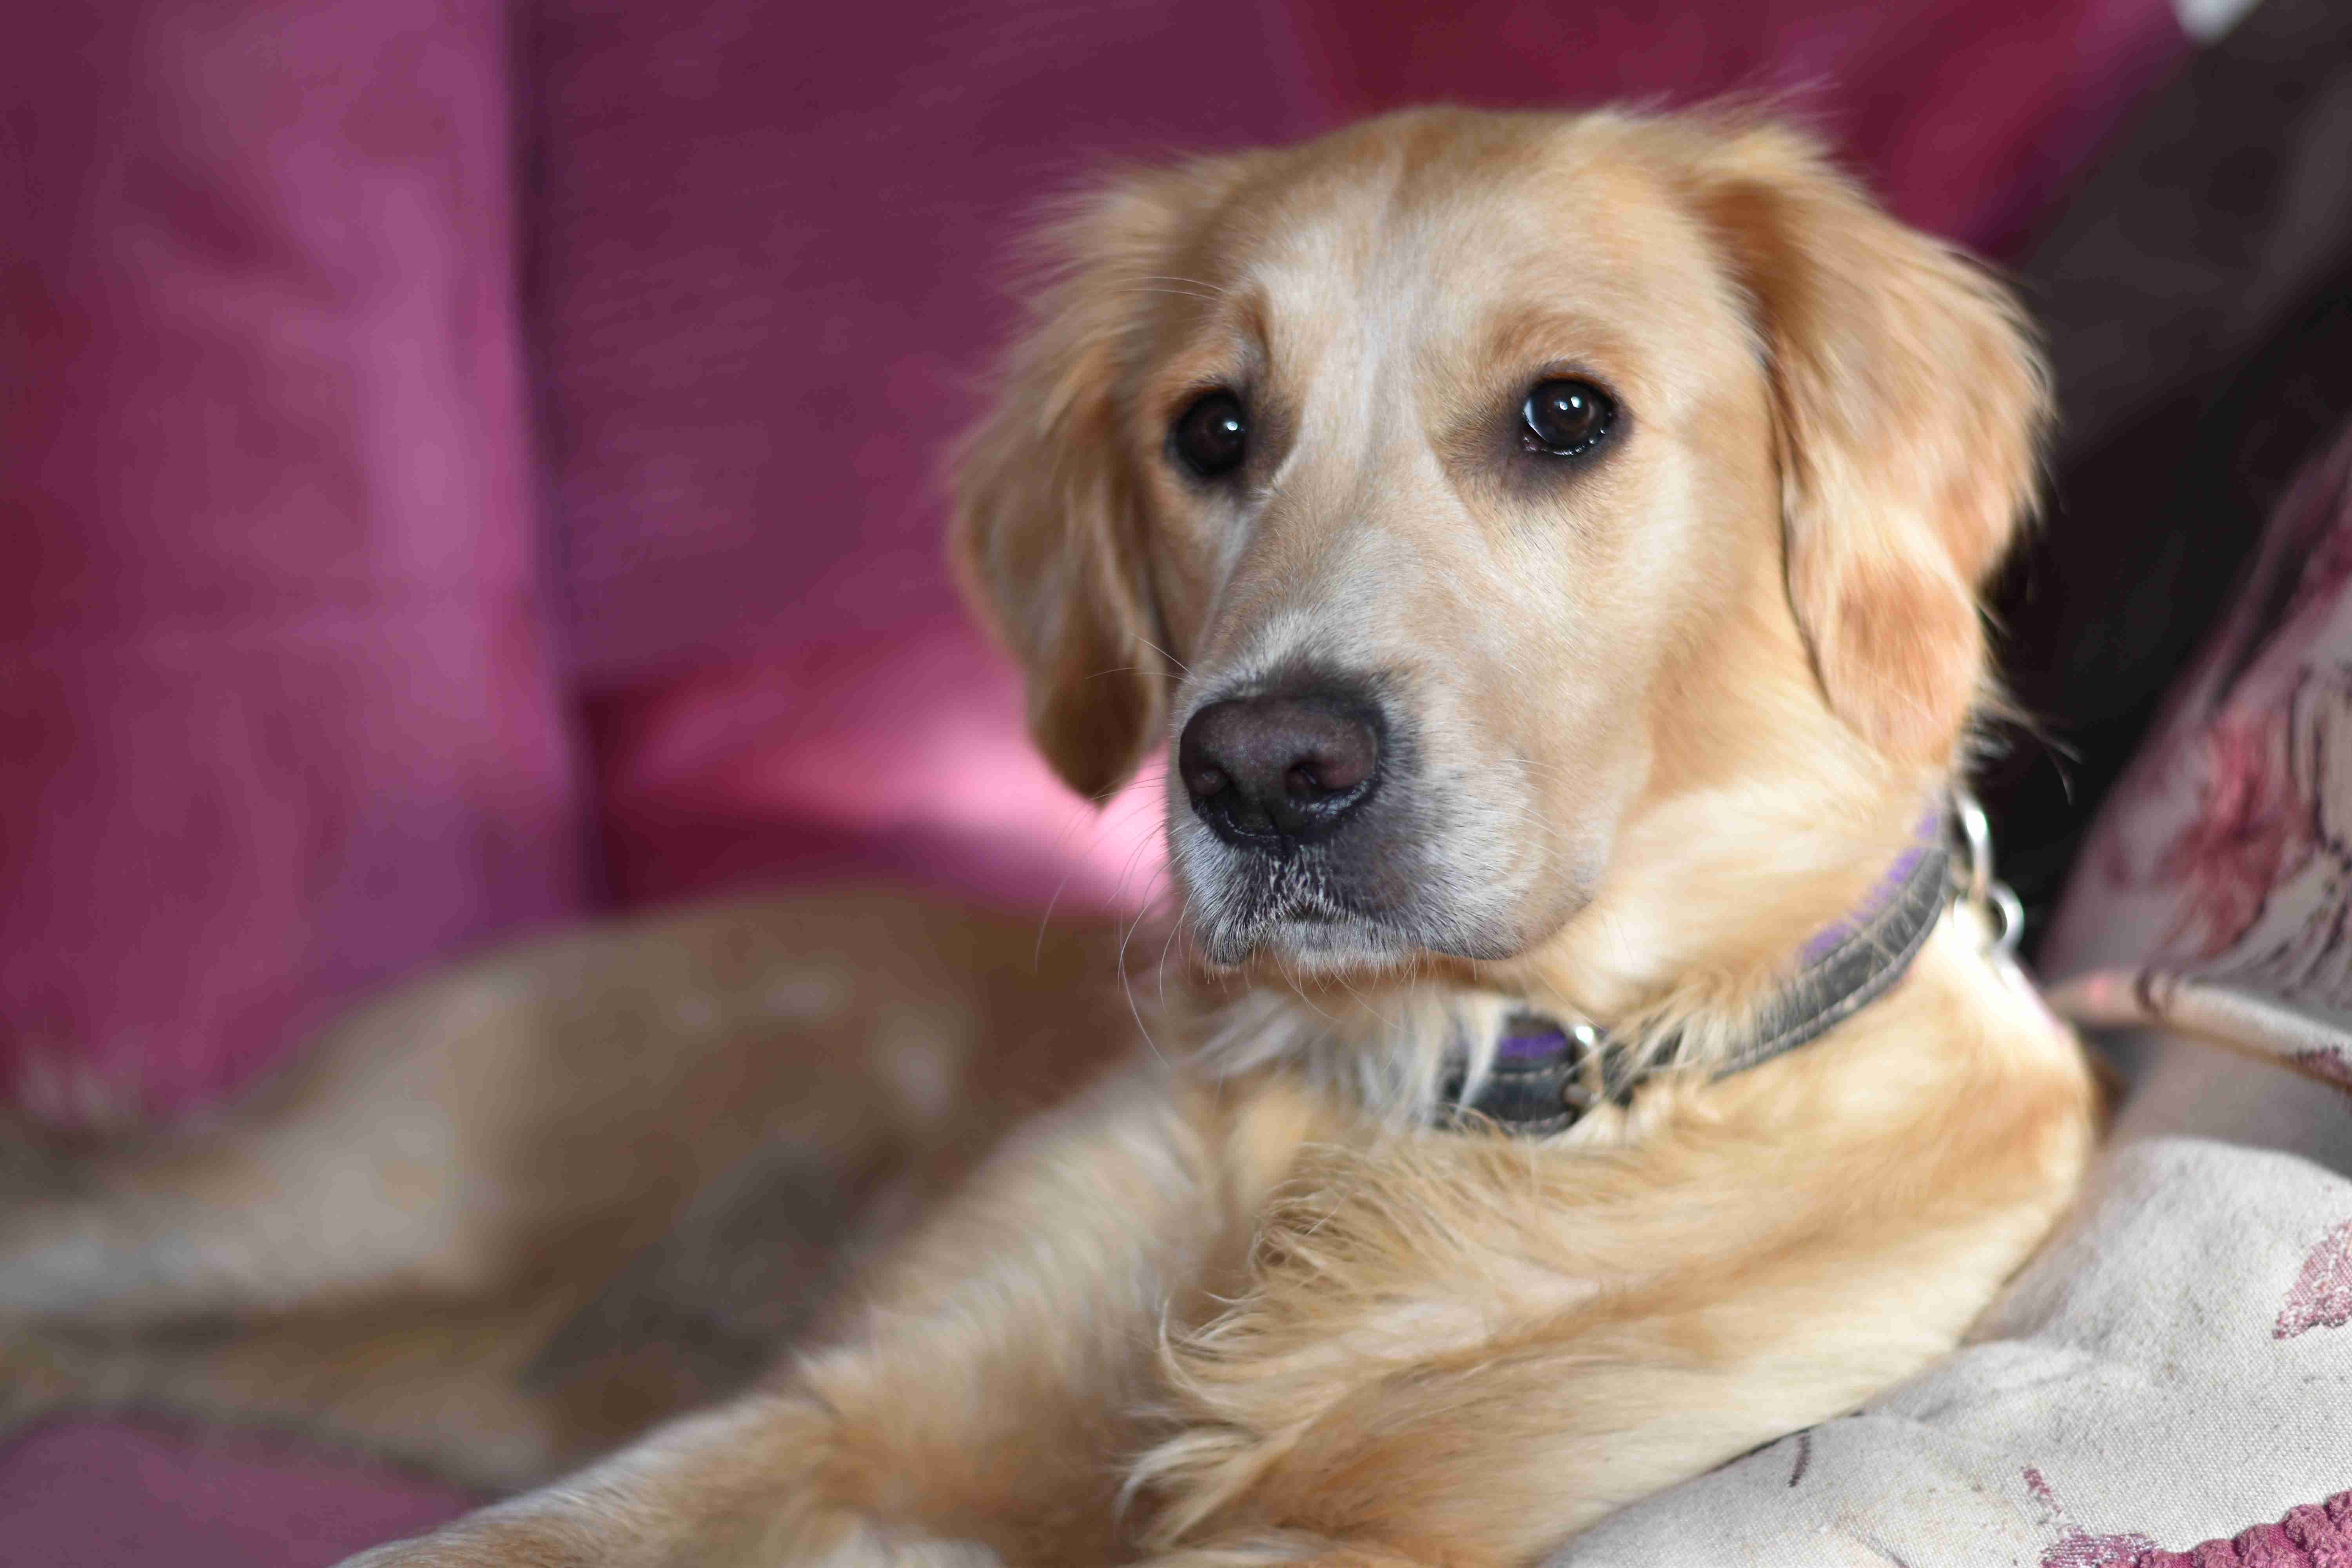 How can I prevent my Golden Retriever from developing joint issues?